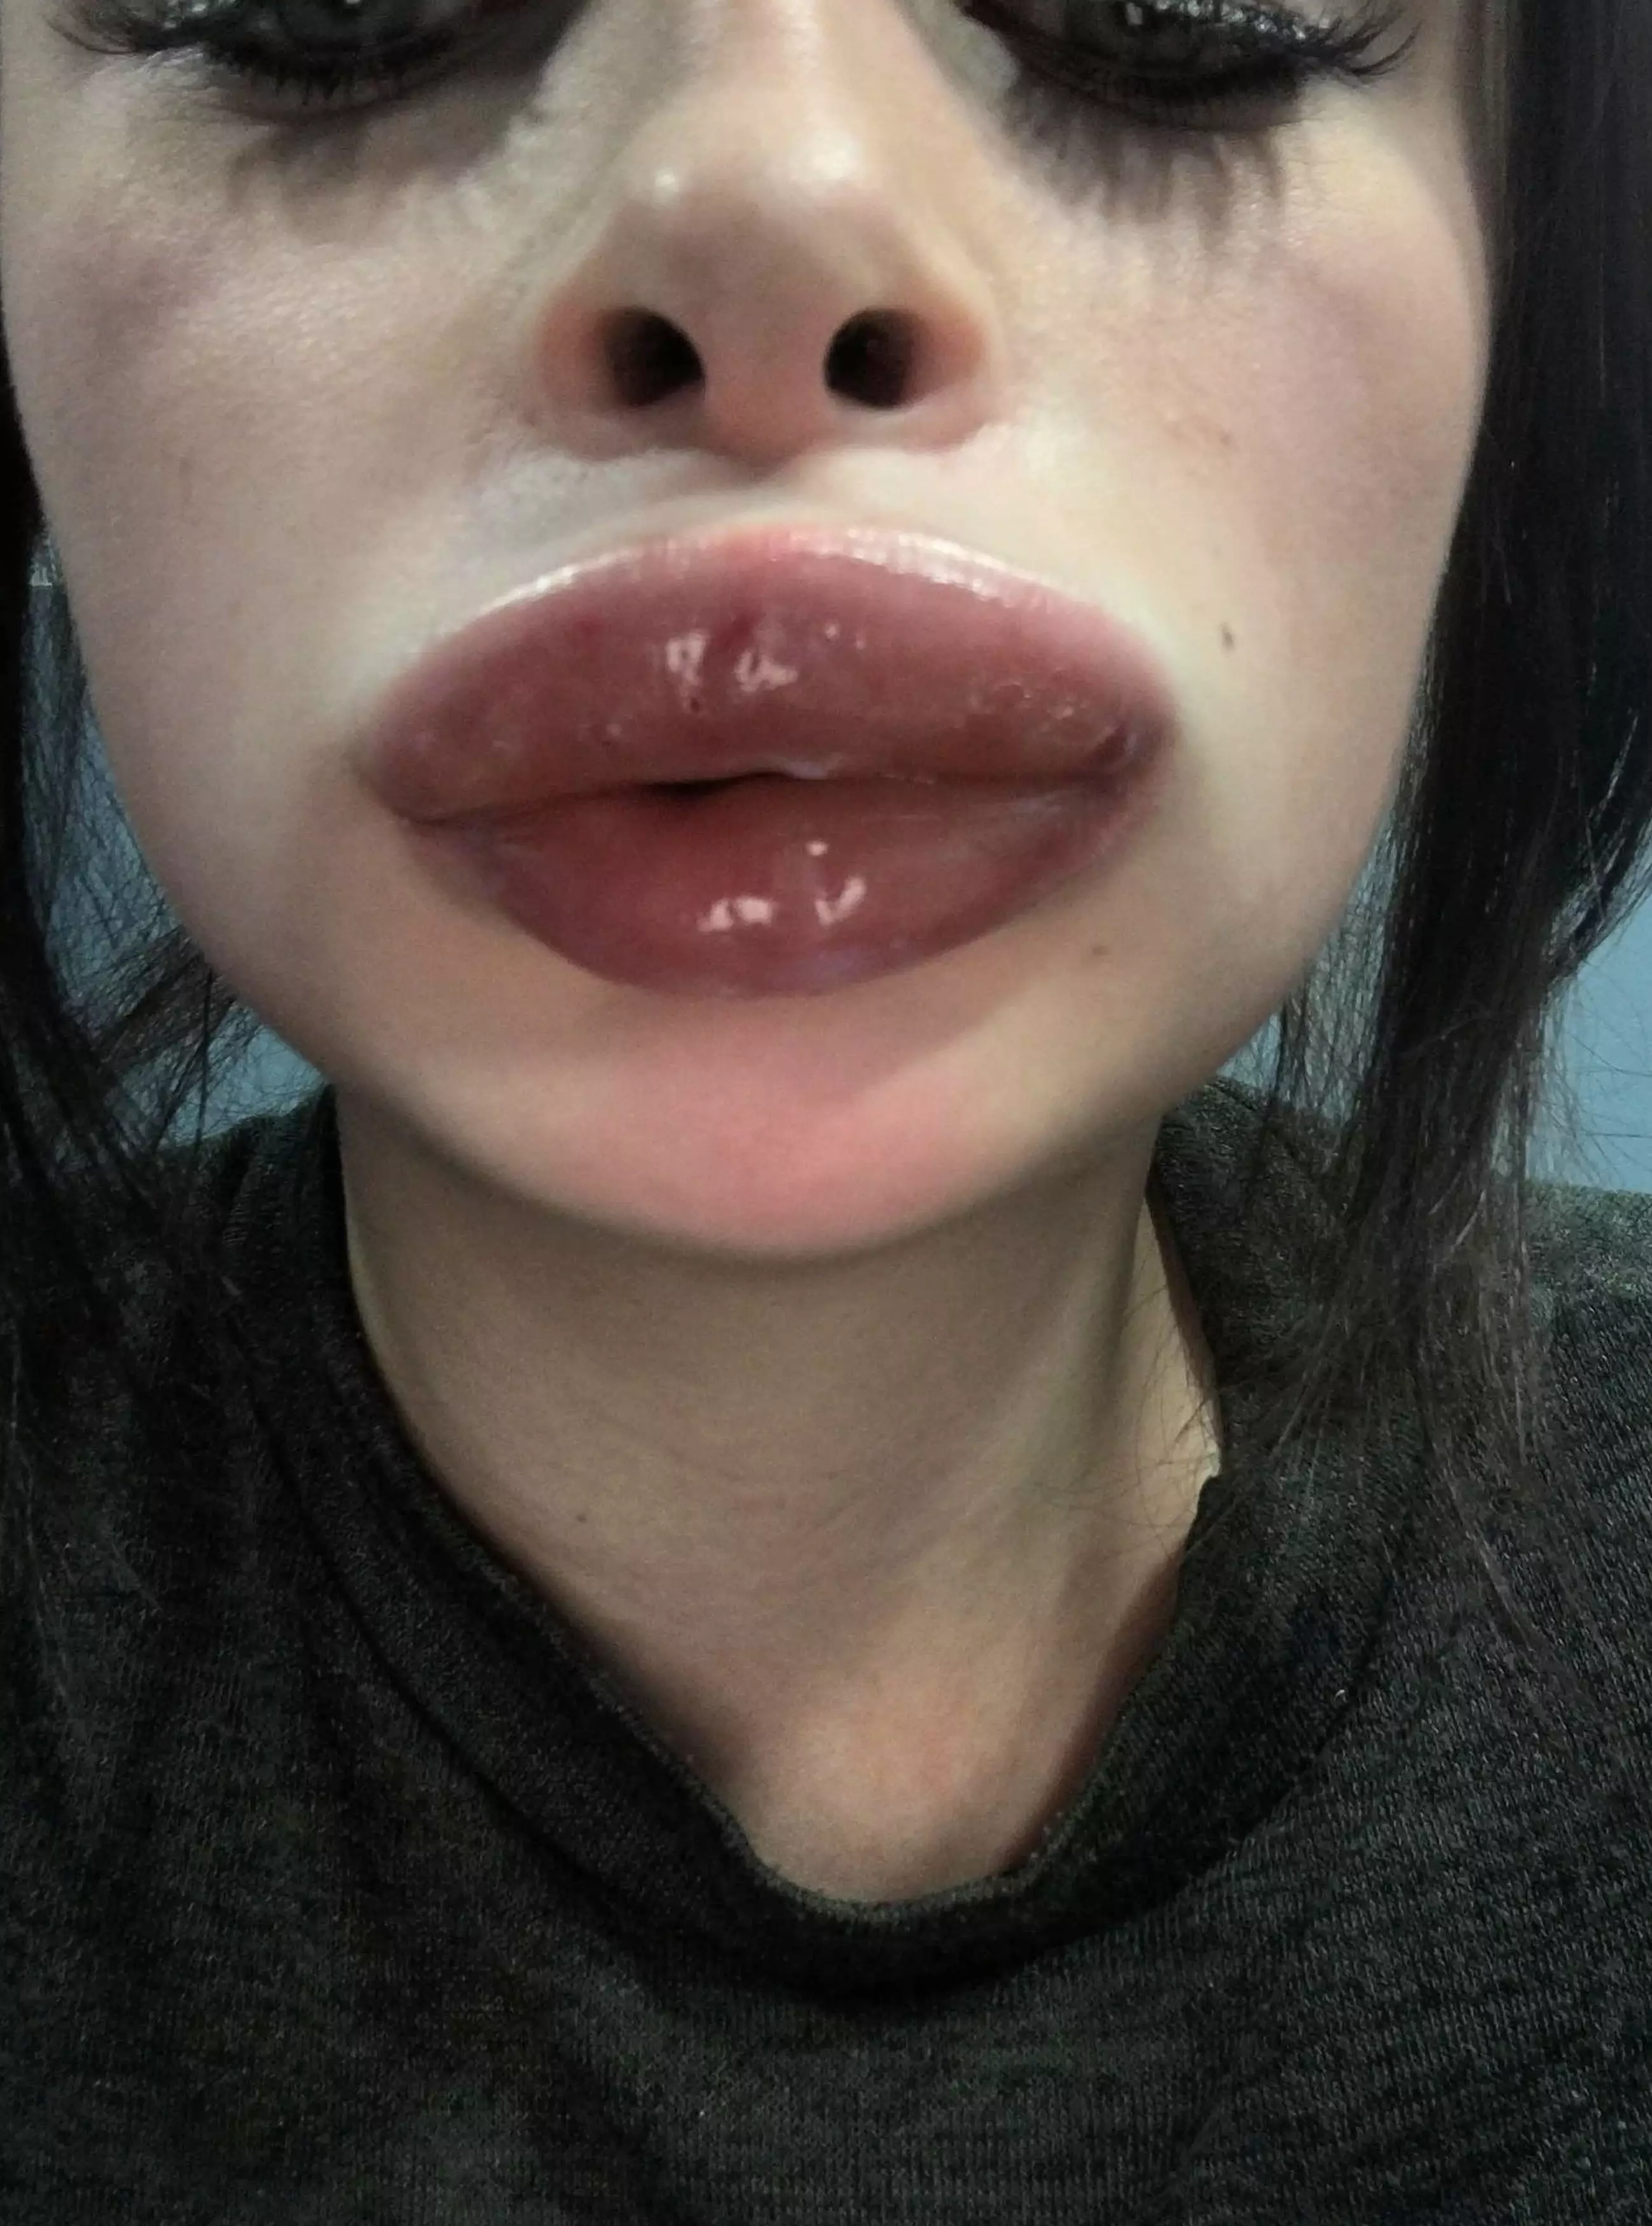 The young mum wants to warn people about the dangers of lip fillers.